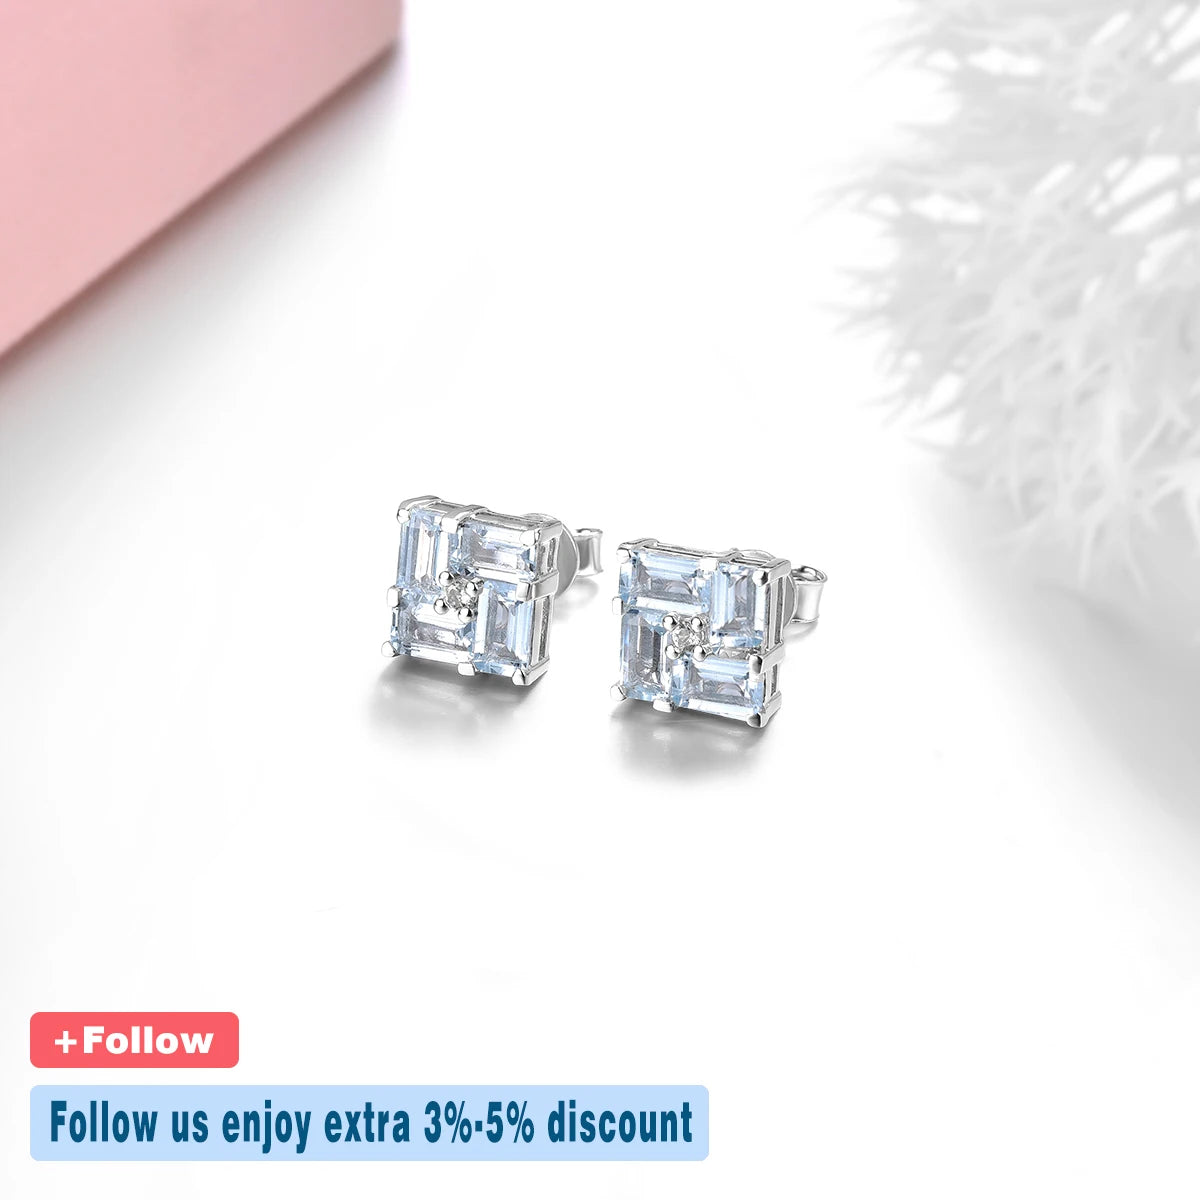 Stock Clearance Genuine Aquamarine Sterling Silver Stud Earrings 2 Carats Light Blue Gemstone Women Exquisite Style S925 Jewelry